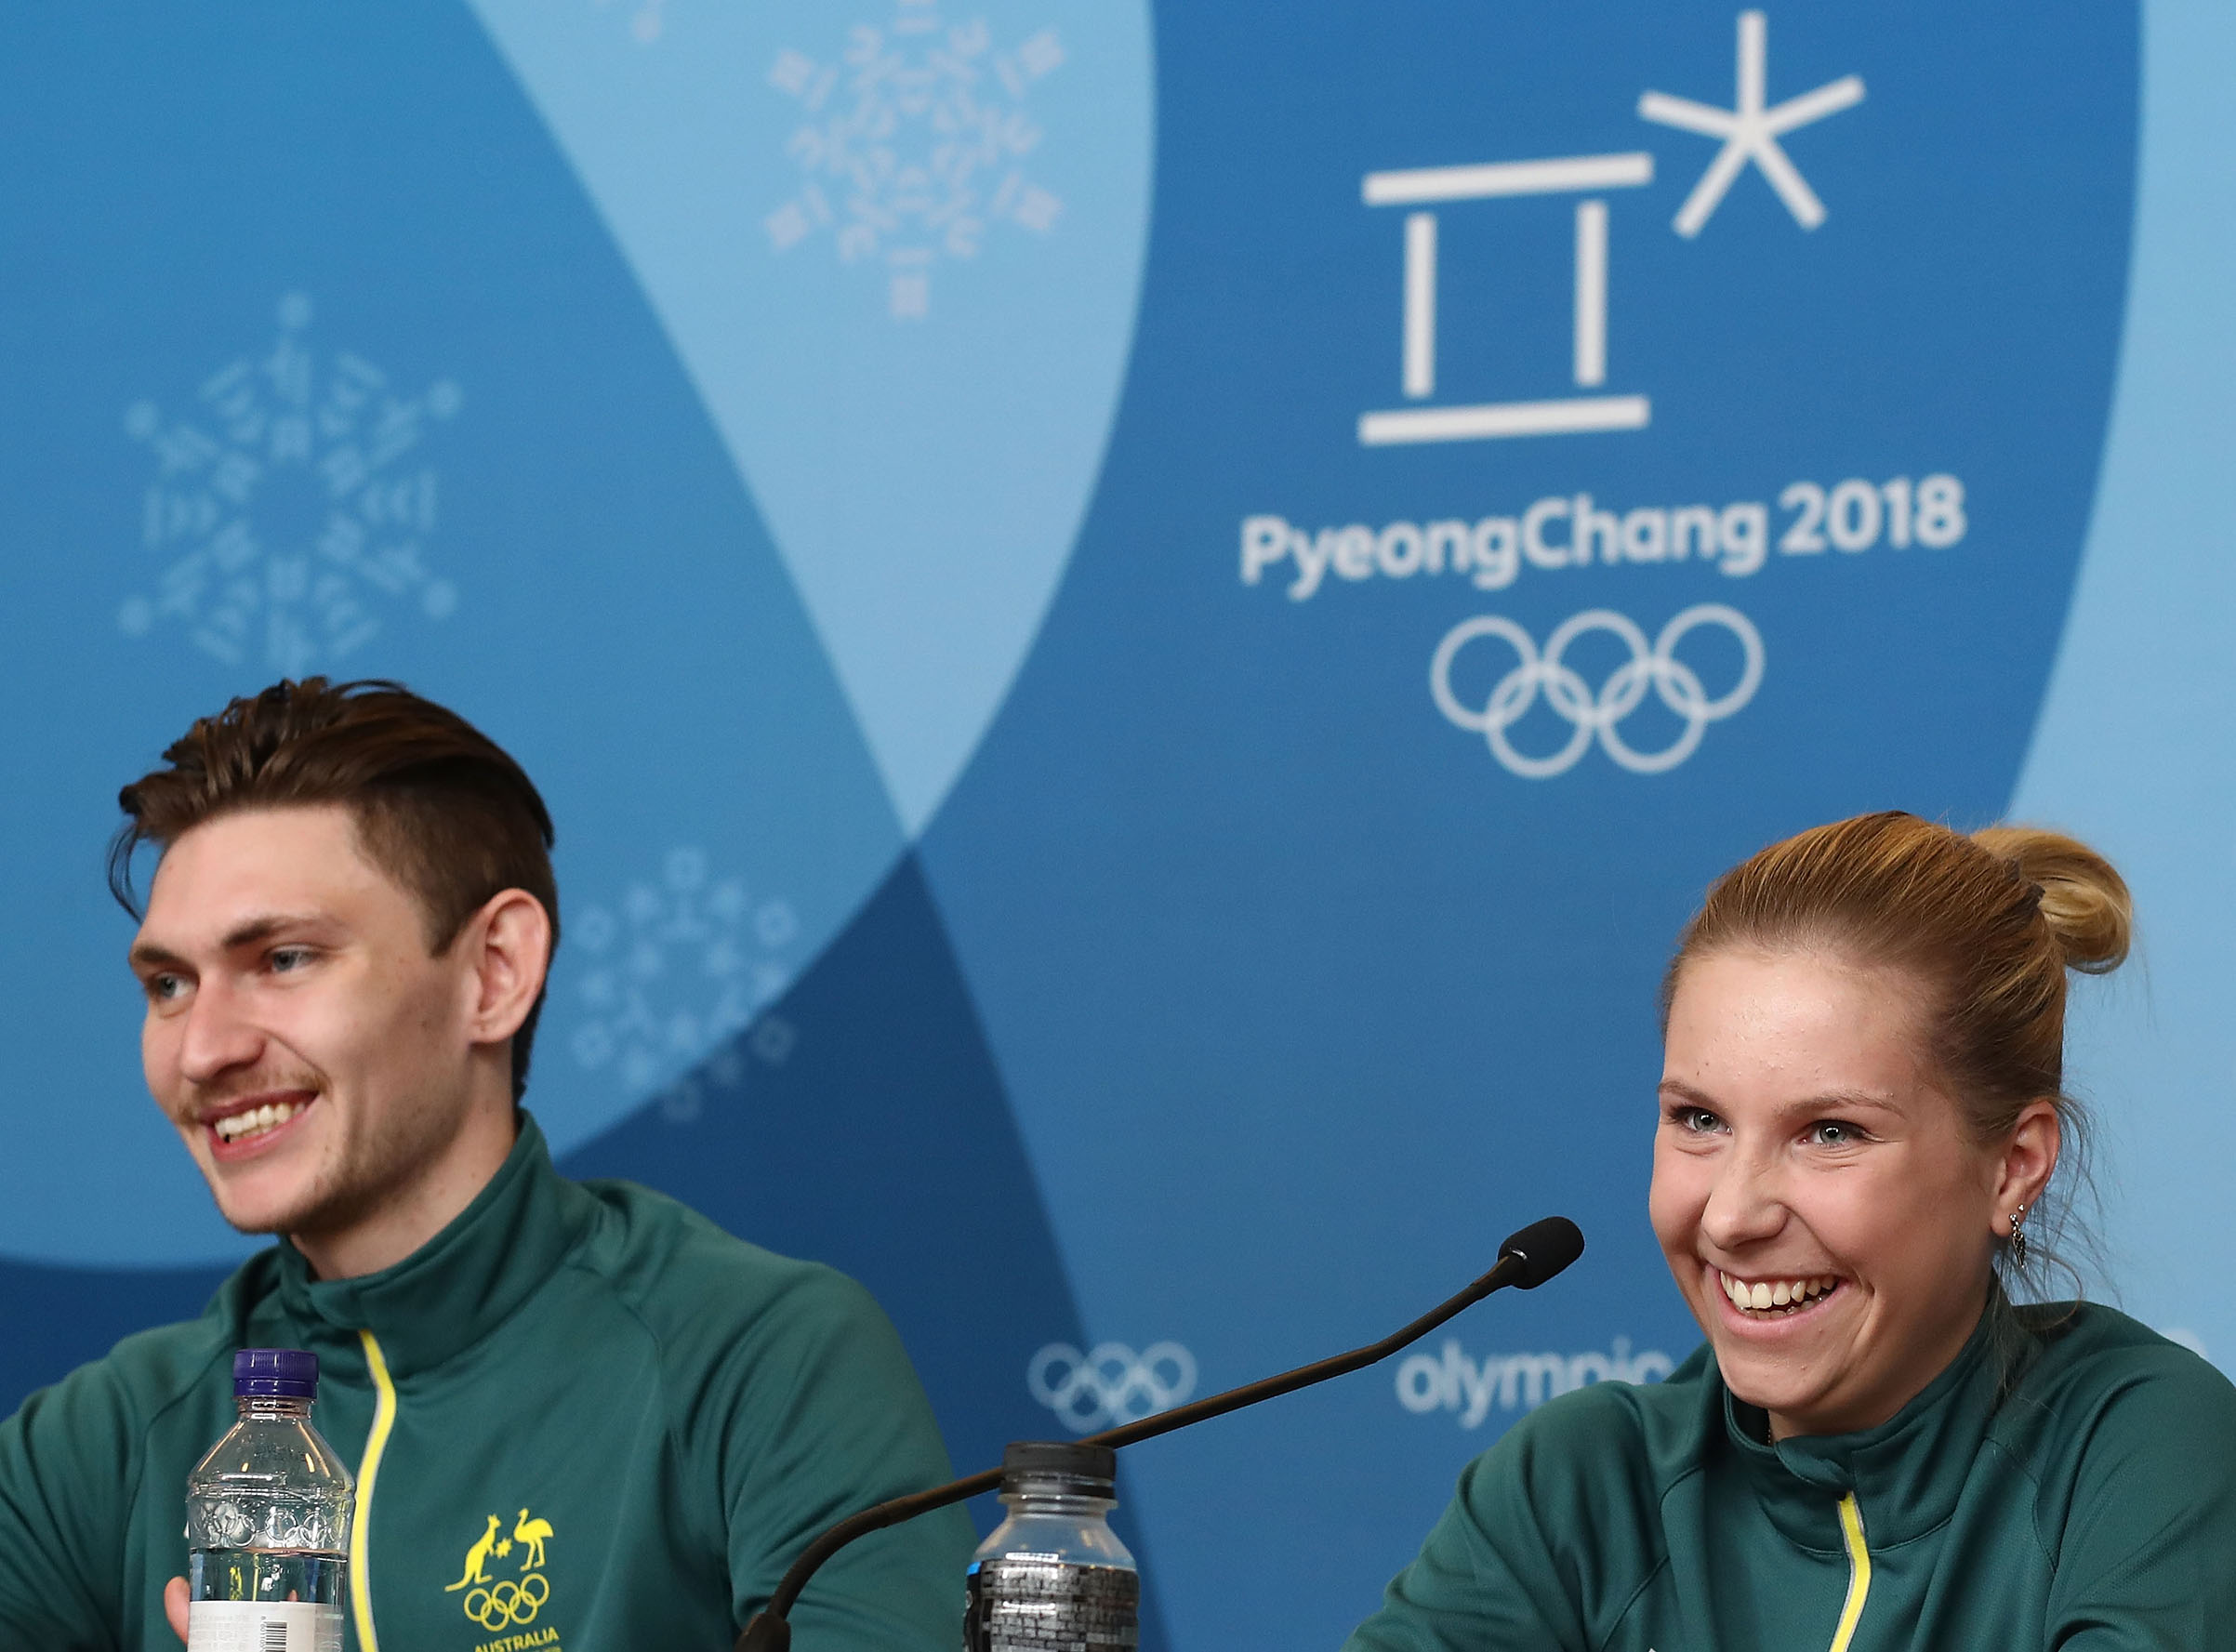 Australian Figure Skaters Harley Windsor and Ekaterina Alexandrovskaya speak during a press conference ahead of the PyeongChang 2018 Winter Olympic Games at Alpensia Ski Resort in Pyeongchang-gun, South Korea, on Feb. 8, 2018. (Ryan Pierse—Getty Images)